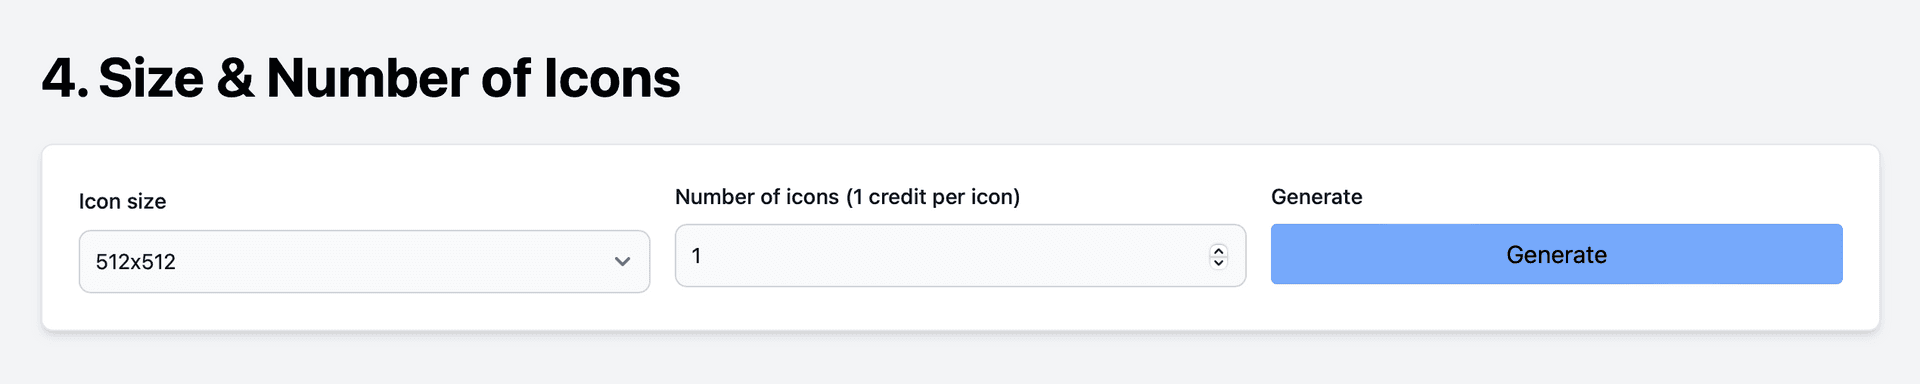 Select icon size and number to generate